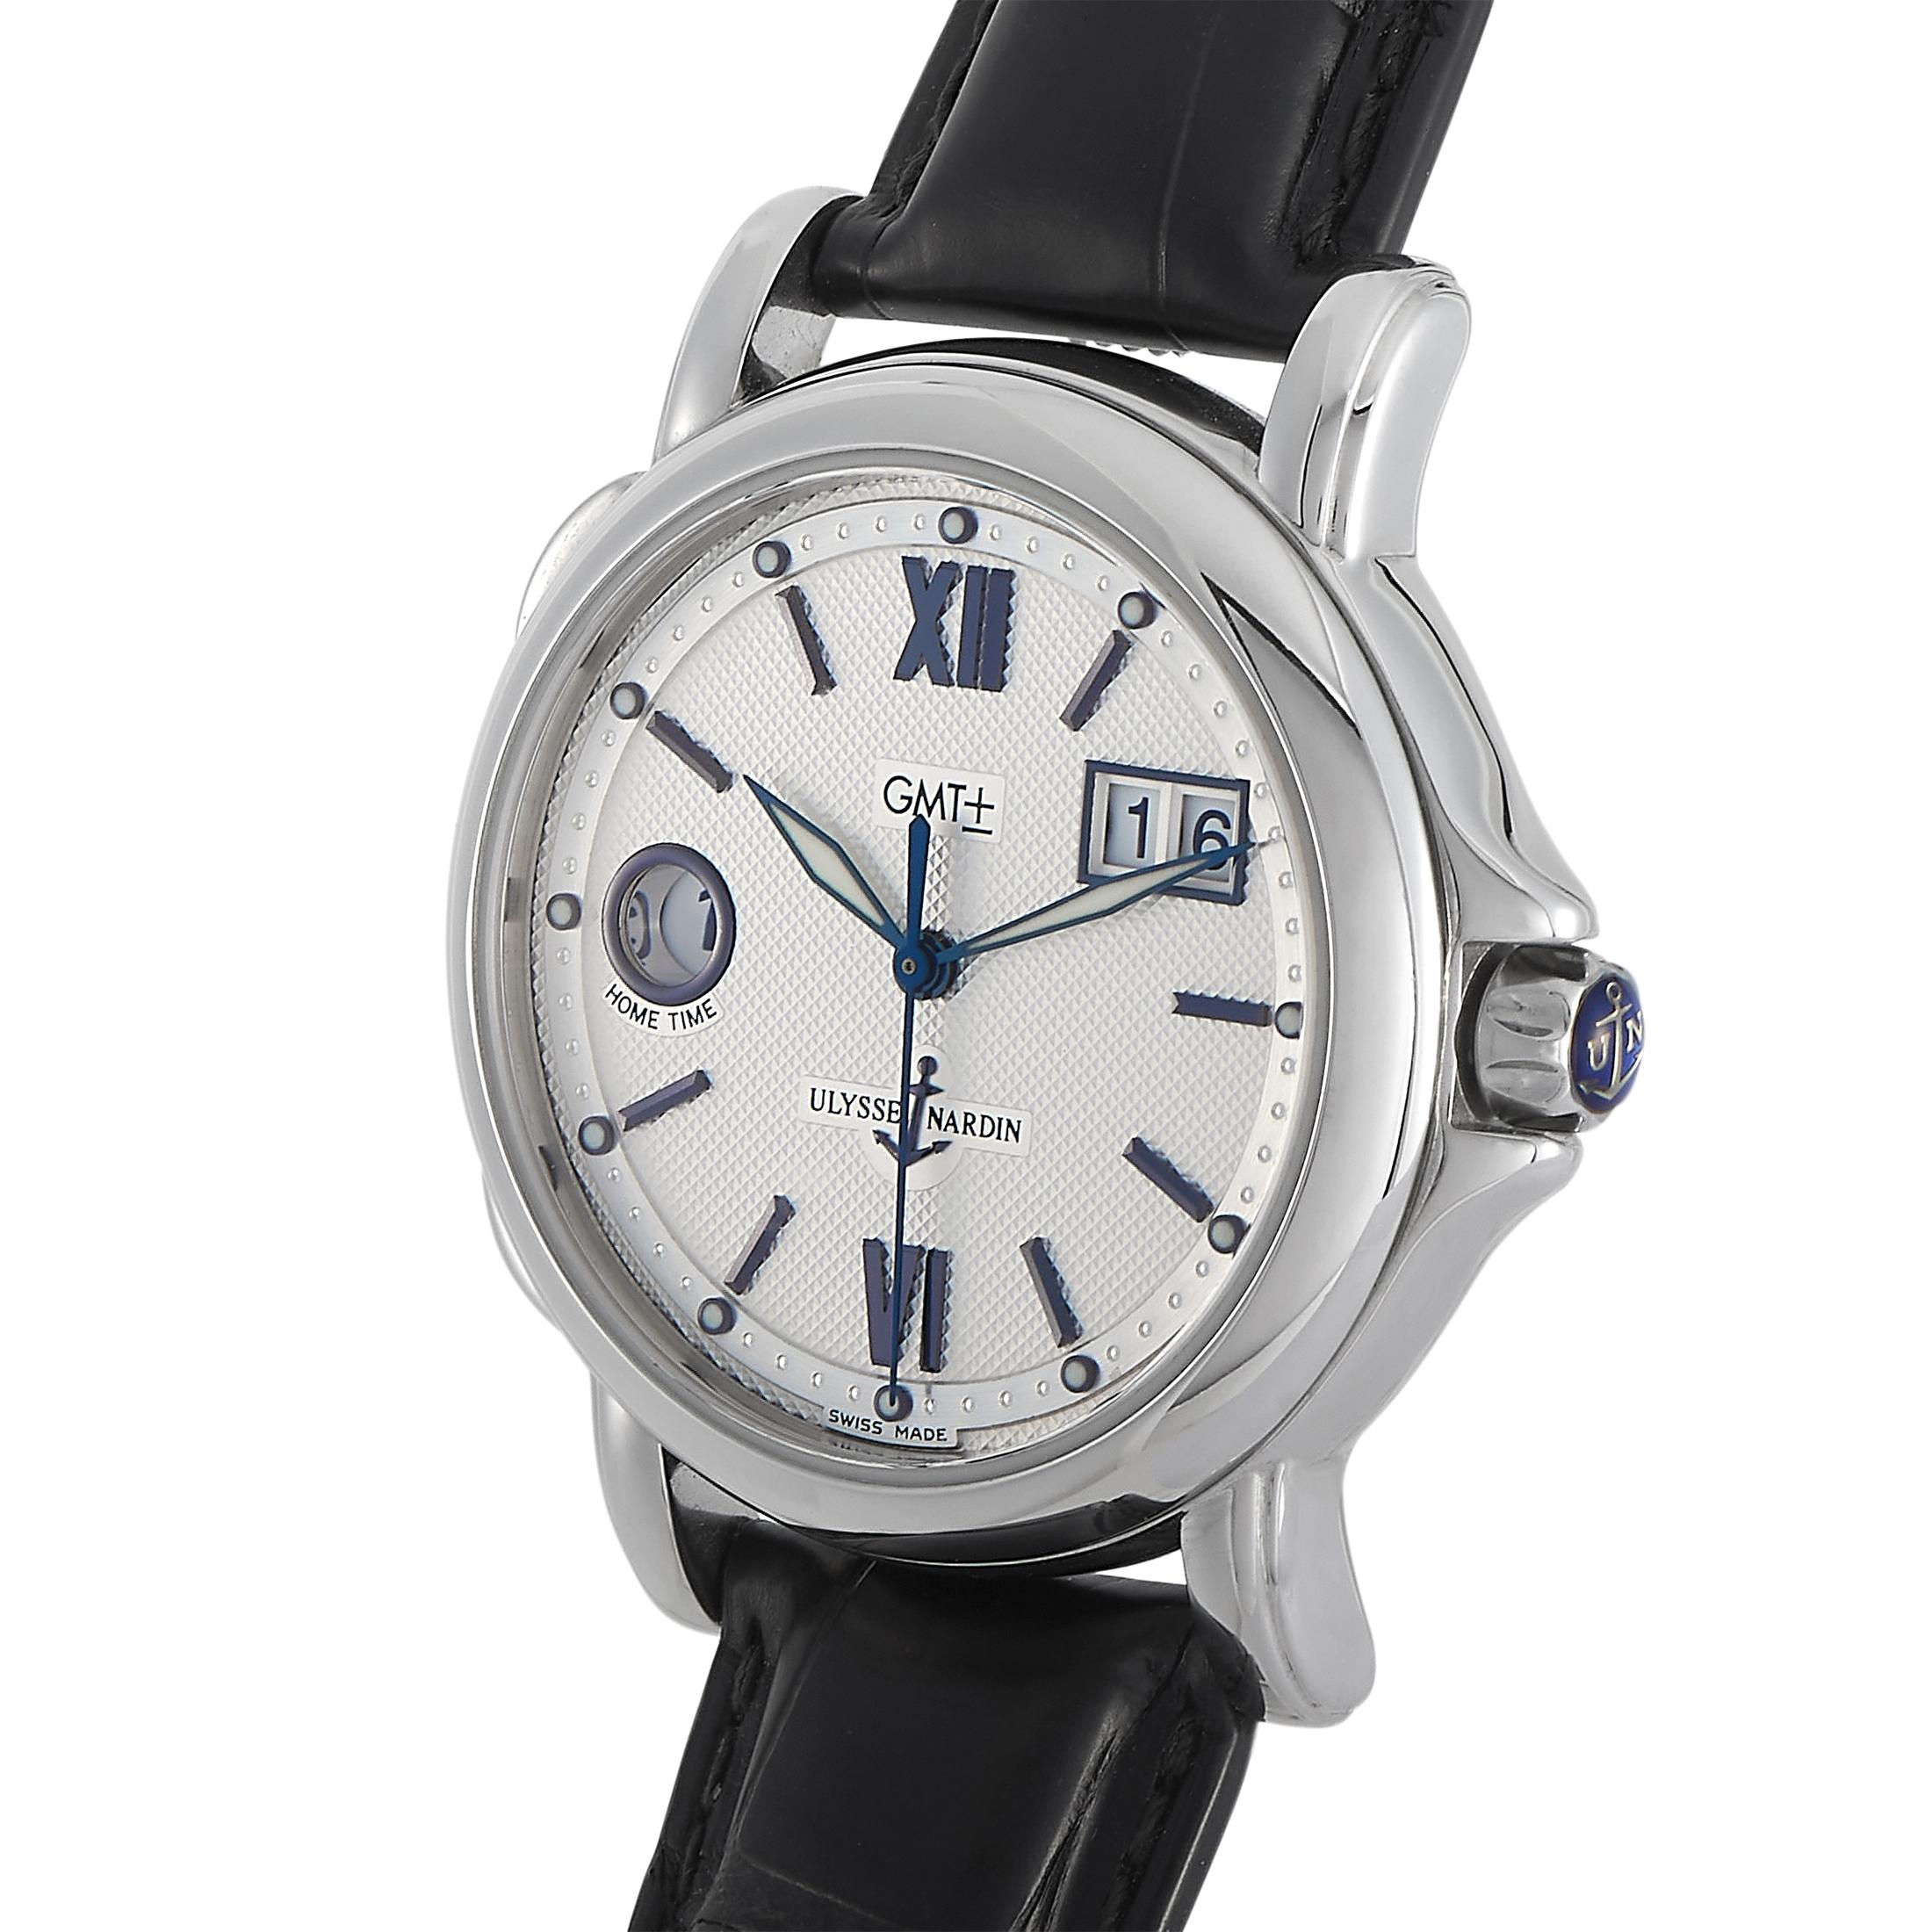 The Ulysse Nardin Big Date San Marco Watch, reference number 223-88, is a classic timepiece with a traditional sense of style. 

This watch includes a 40mm case crafted from stainless steel. On the Silver Guilloche dial, you’ll find luminous hands